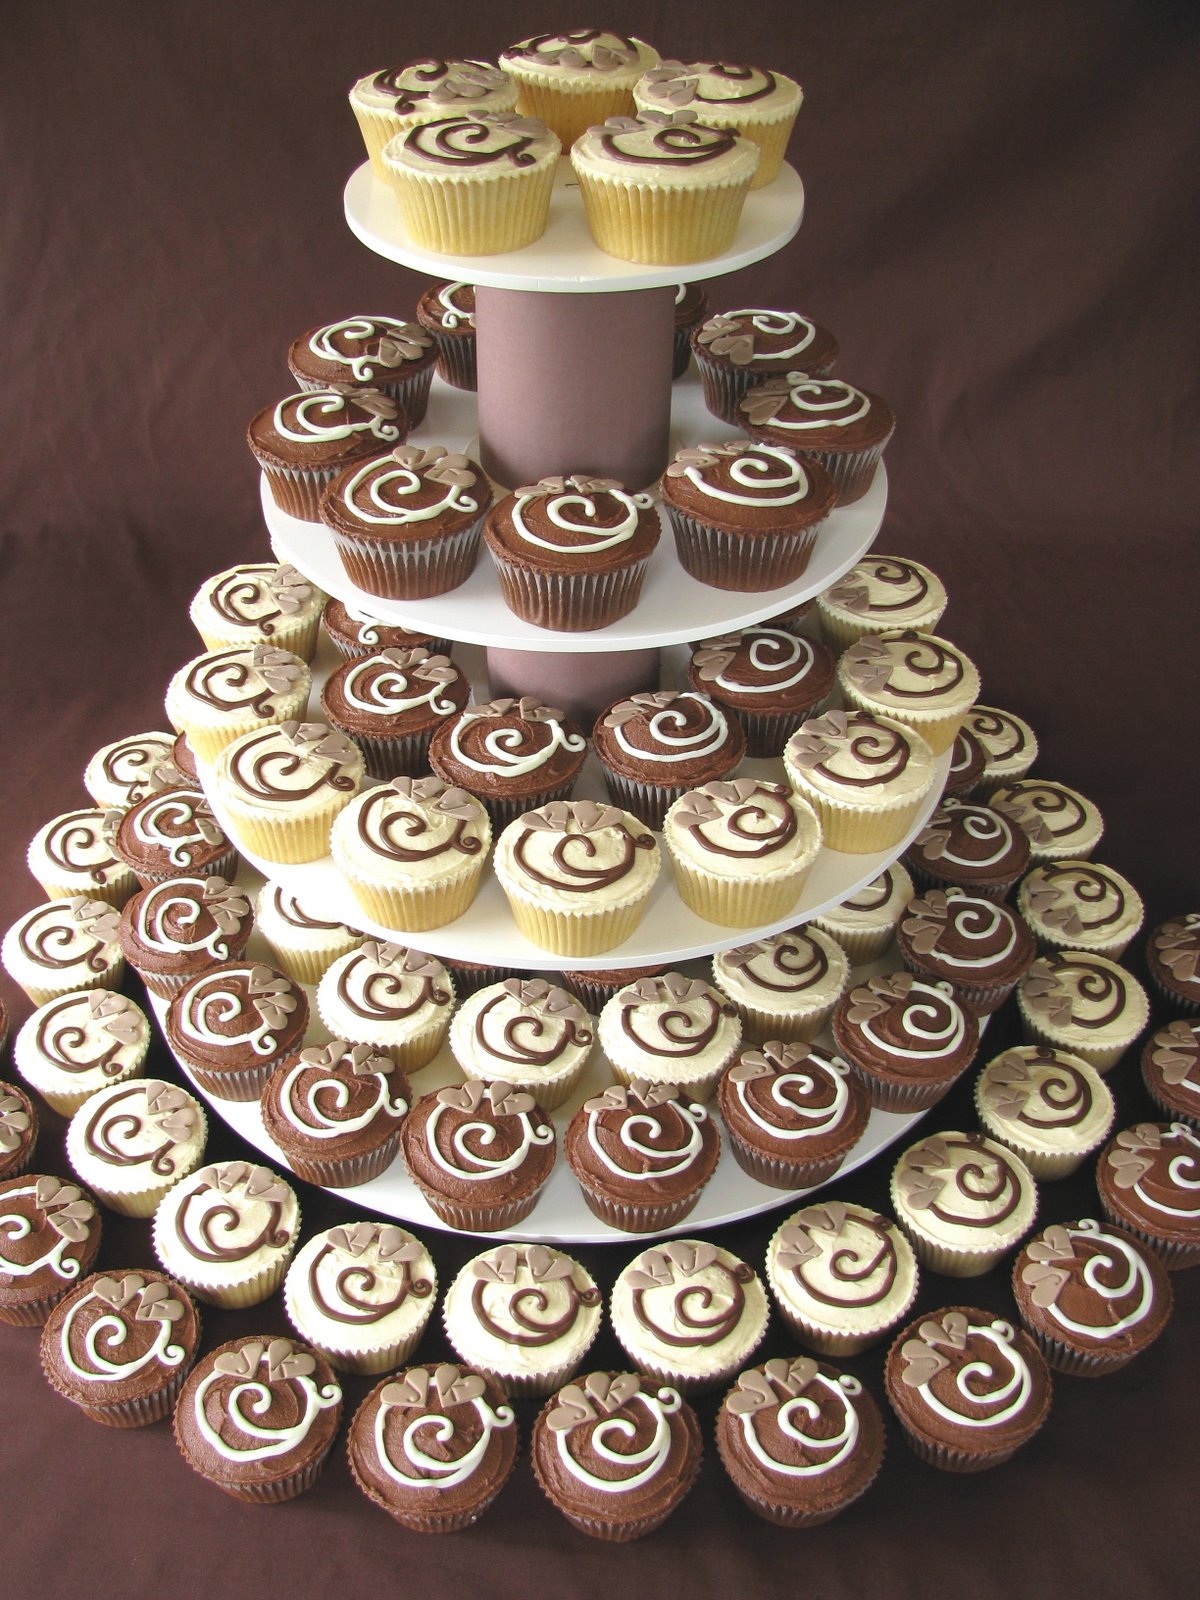 CELEBRITY BUZZ GET CREATIVE WITH YOUR WEDDING  CAKE  TRY 